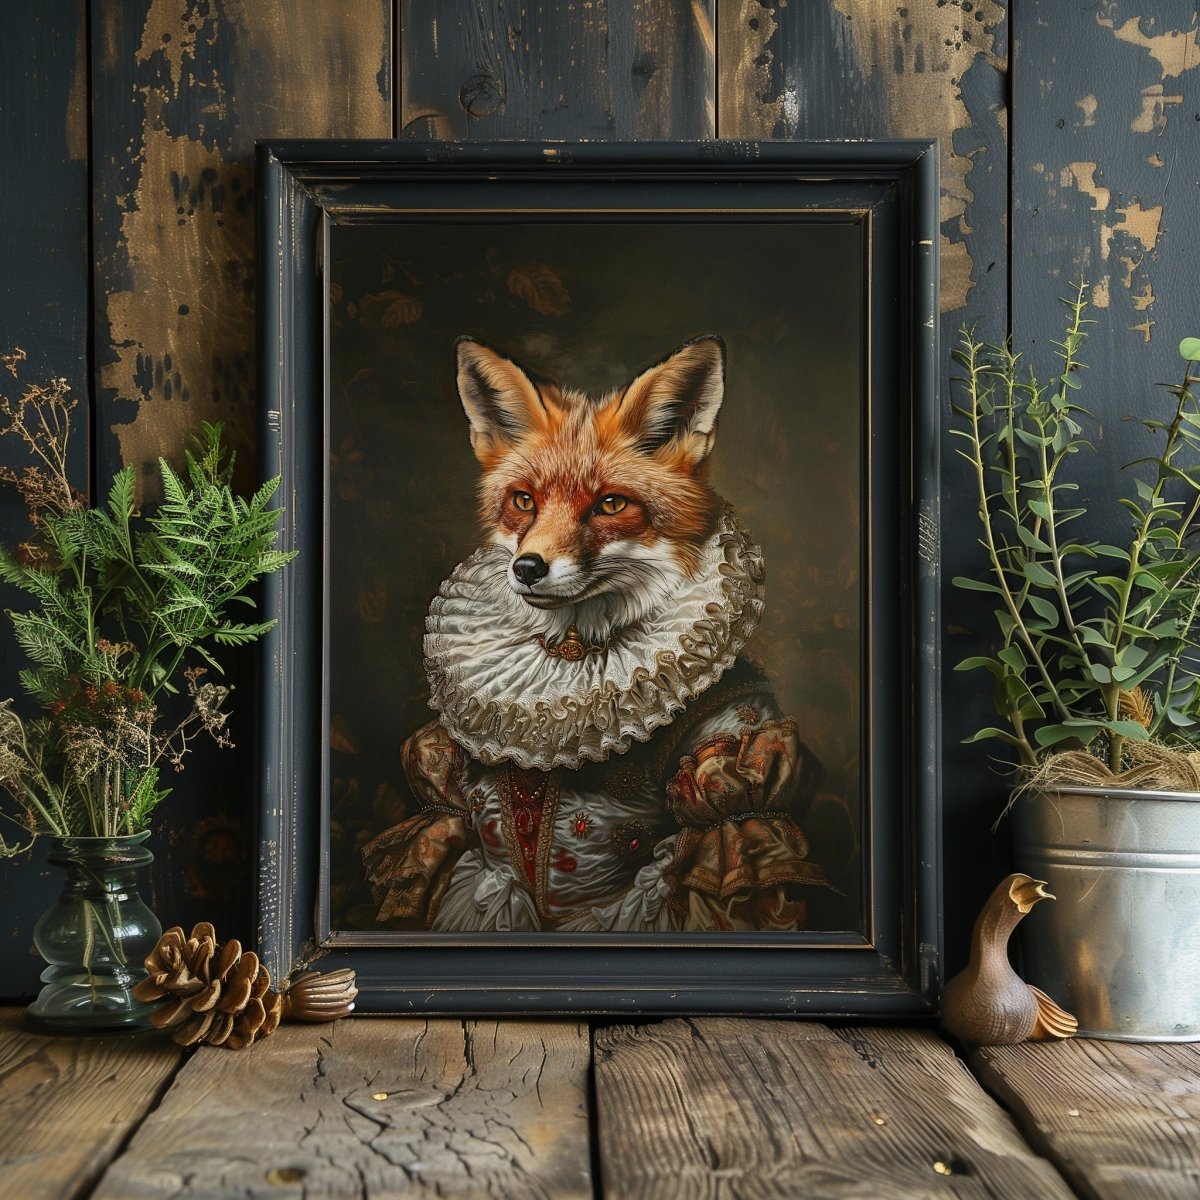 Fox Lady in Renaissance Ruff Costume - Quirky Animal Portrait Print - Gothic Wall Art - Everything Pixel